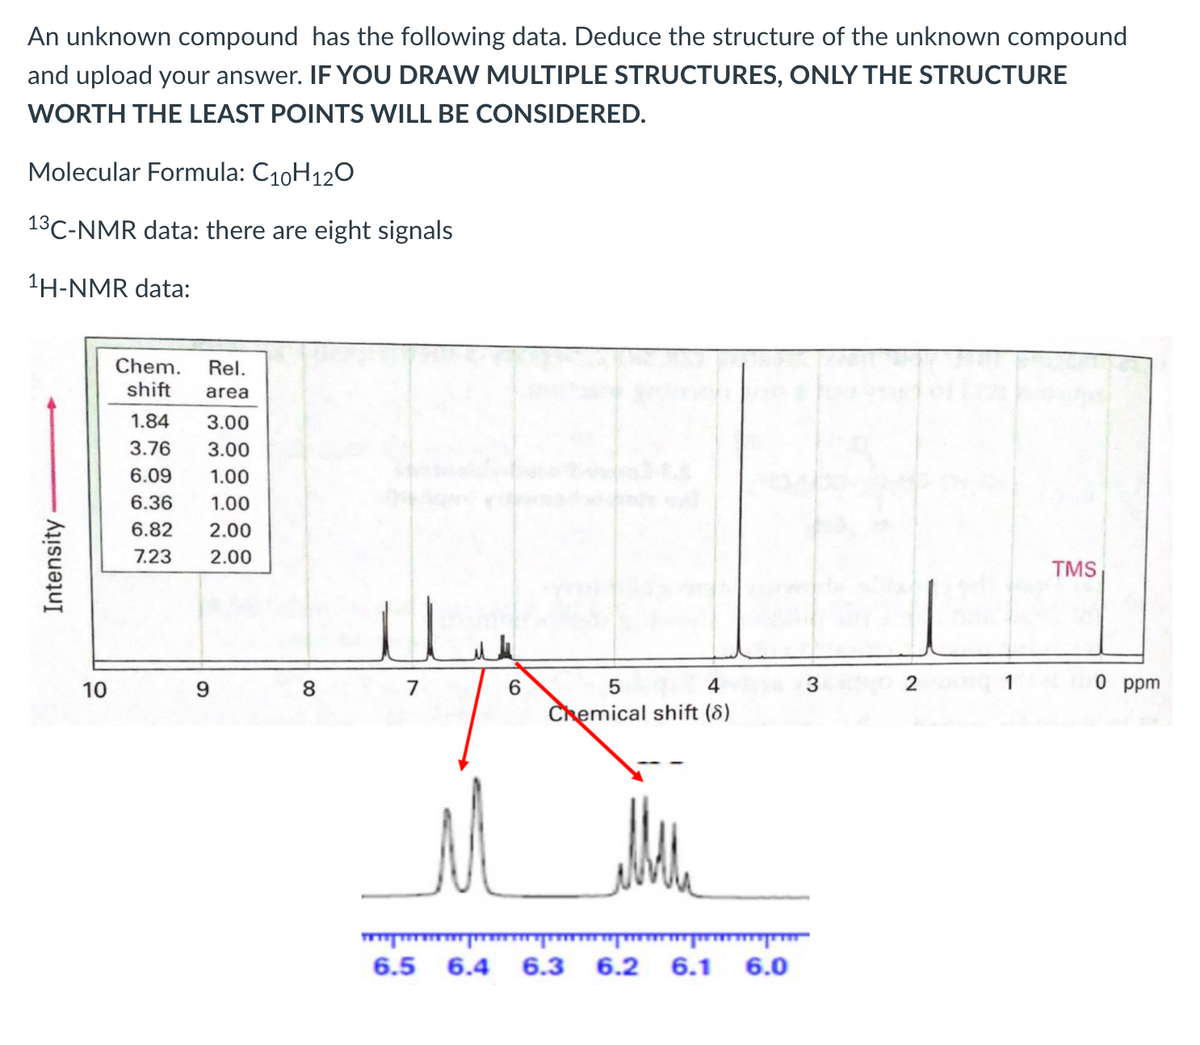 An unknown compound has the following data. Deduce the structure of the unknown compound
and upload your answer. IF YOU DRAW MULTIPLE STRUCTURES, ONLY THE STRUCTURE
WORTH THE LEAST POINTS WILL BE CONSIDERED.
Molecular Formula: C10H120
13C-NMR data: there are eight signals
1H-NMR data:
Chem.
Rel.
shift
area
1.84
3.00
3.76
3.00
6.09
1.00
6.36
1.00
6.82
2.00
7.23
2.00
TMS
10
9.
8
7
3.
2
1
0 ppm
Chemical shift (8)
6.5 6.4 6.3 6.2 6.1
6.0
Intensity
